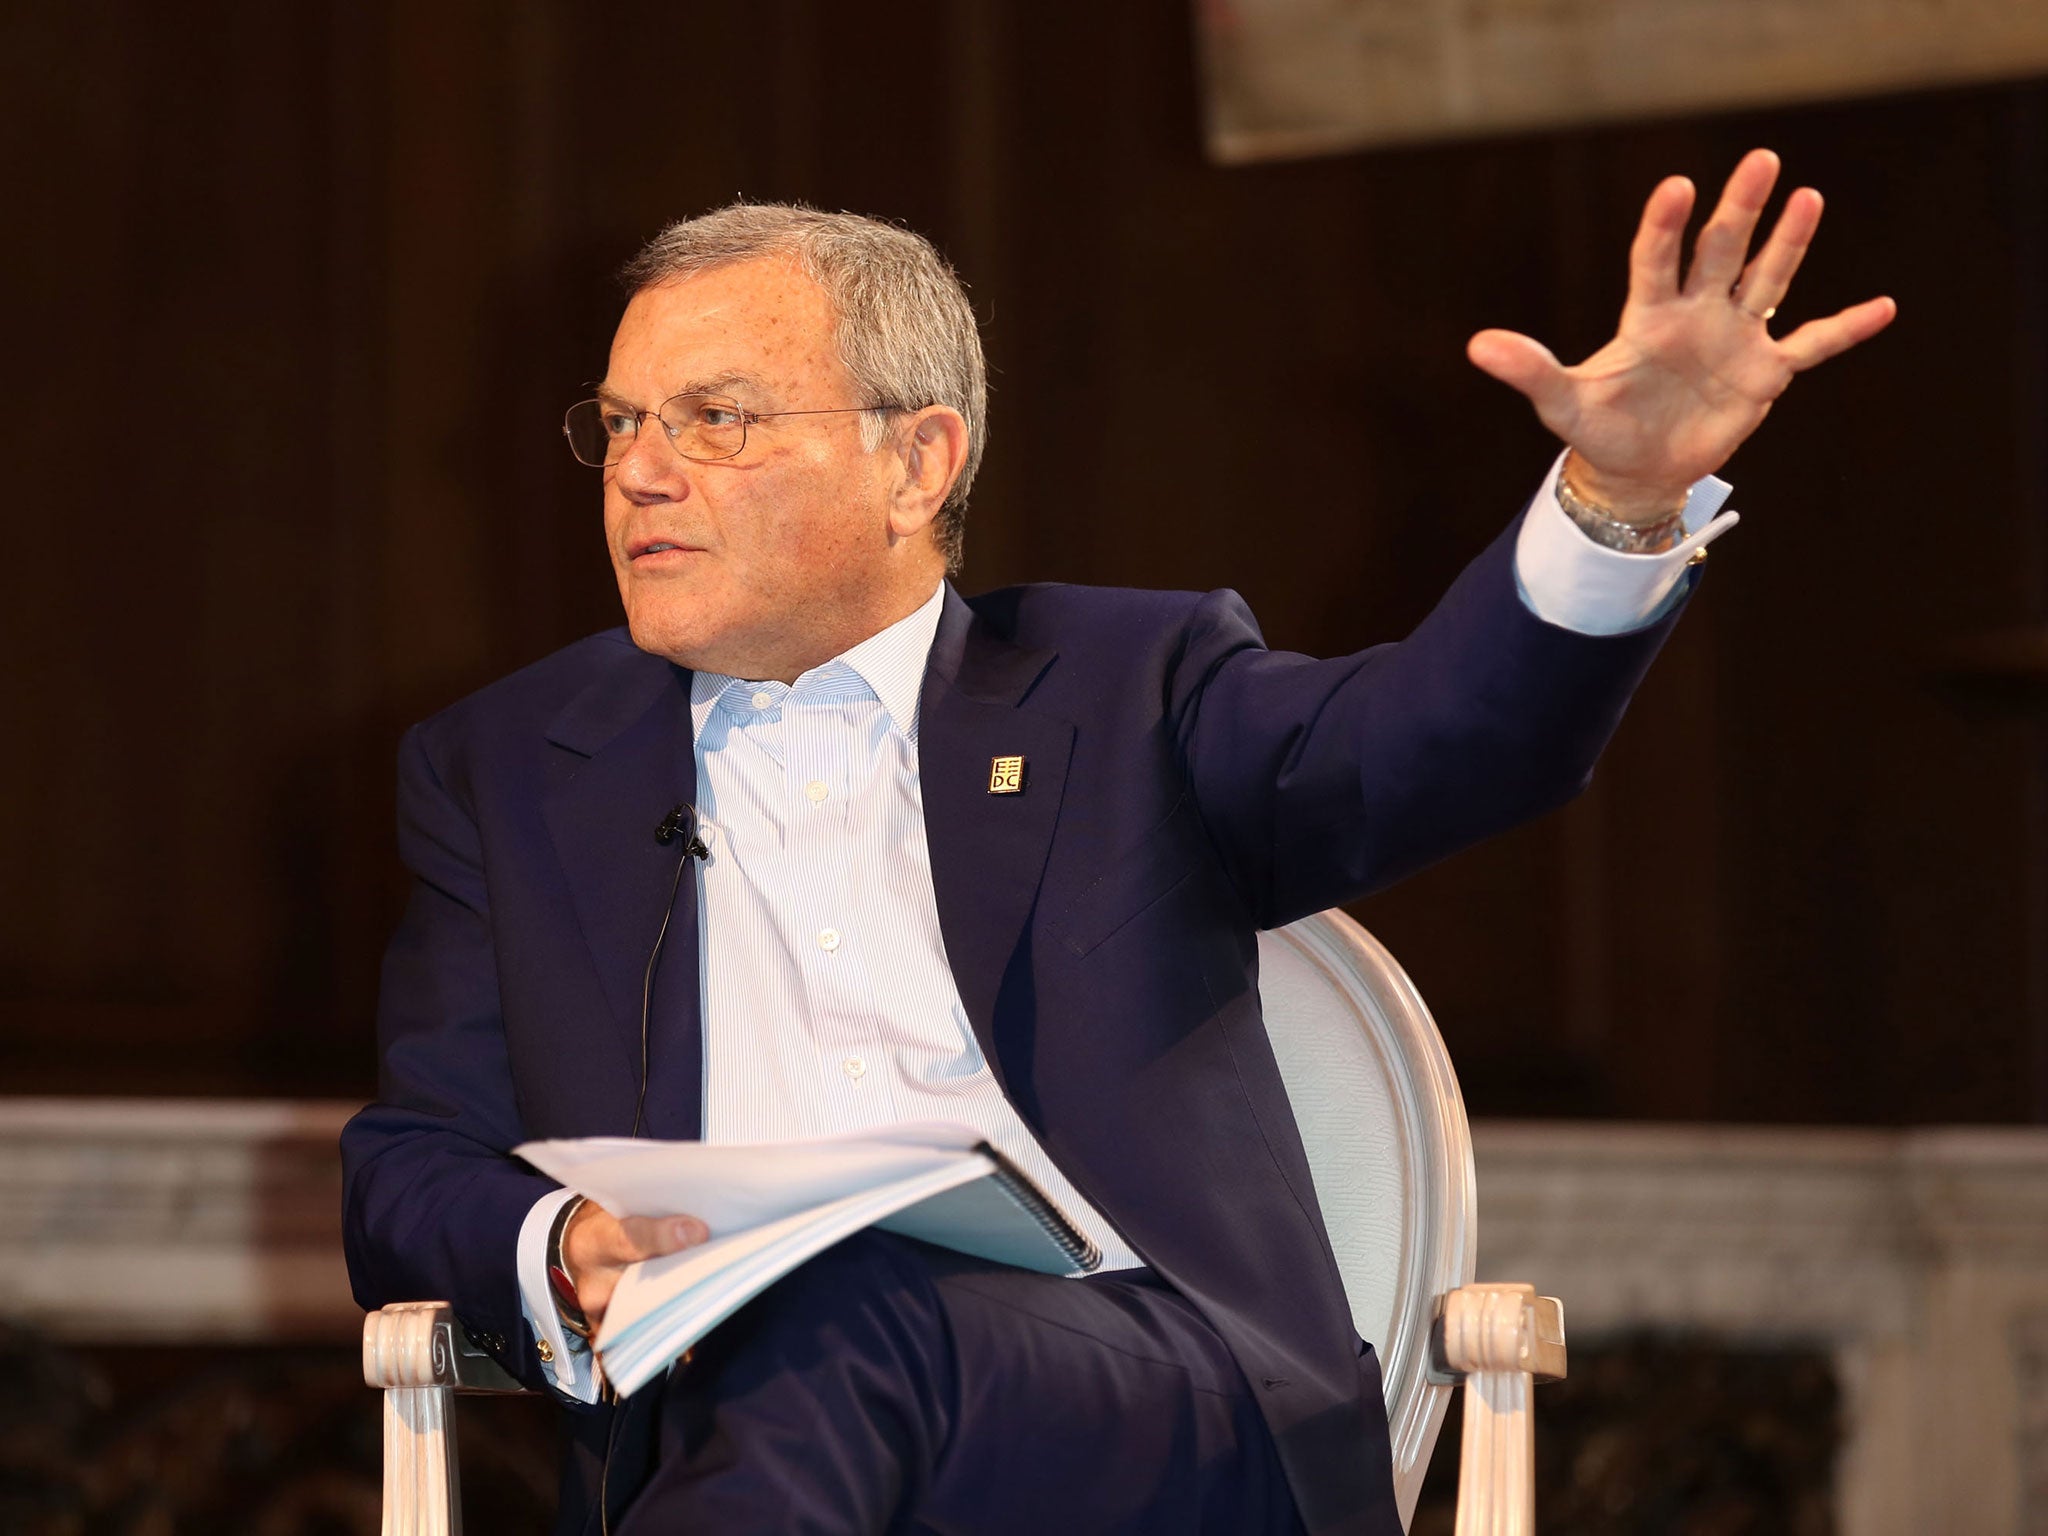 With a £43m annual pay packet, Sir Martin Sorrell is Britain’s top-paid boss